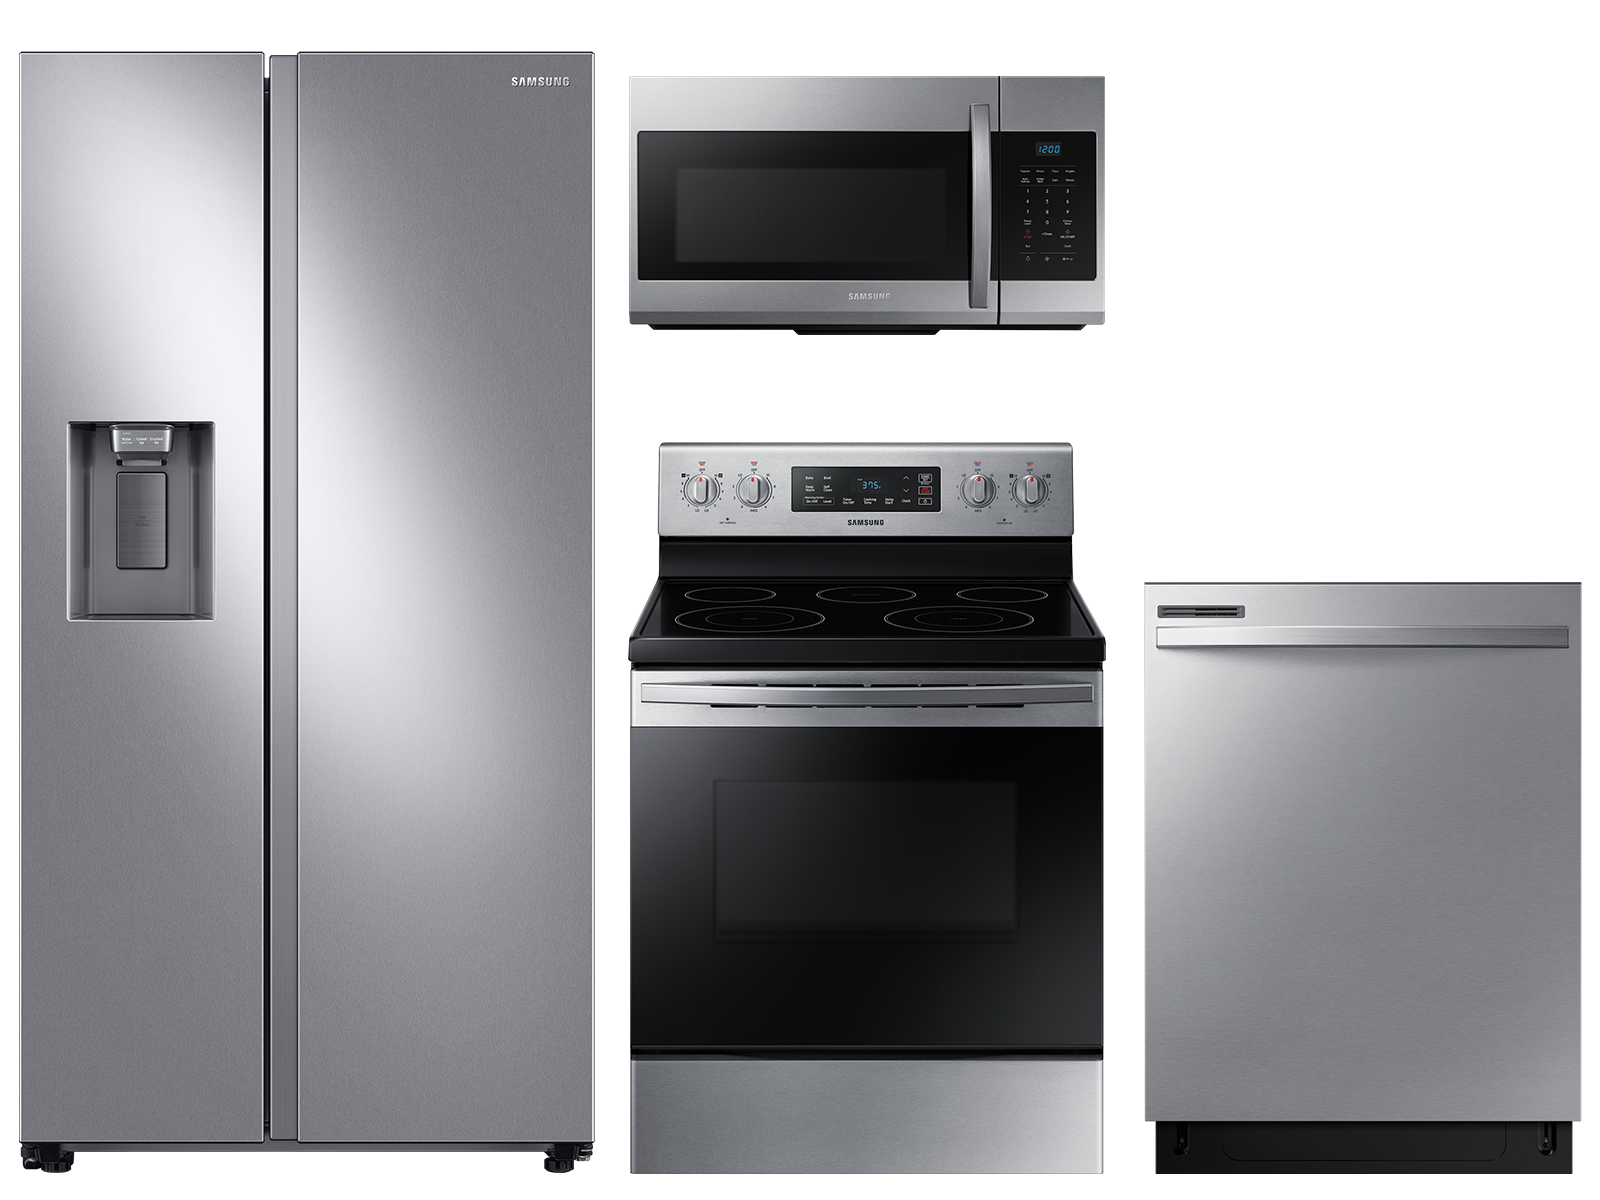 Samsung Large capacity Side-by-Side refrigerator & electric range package in Stainless Steel(BNDL-1590166657161)